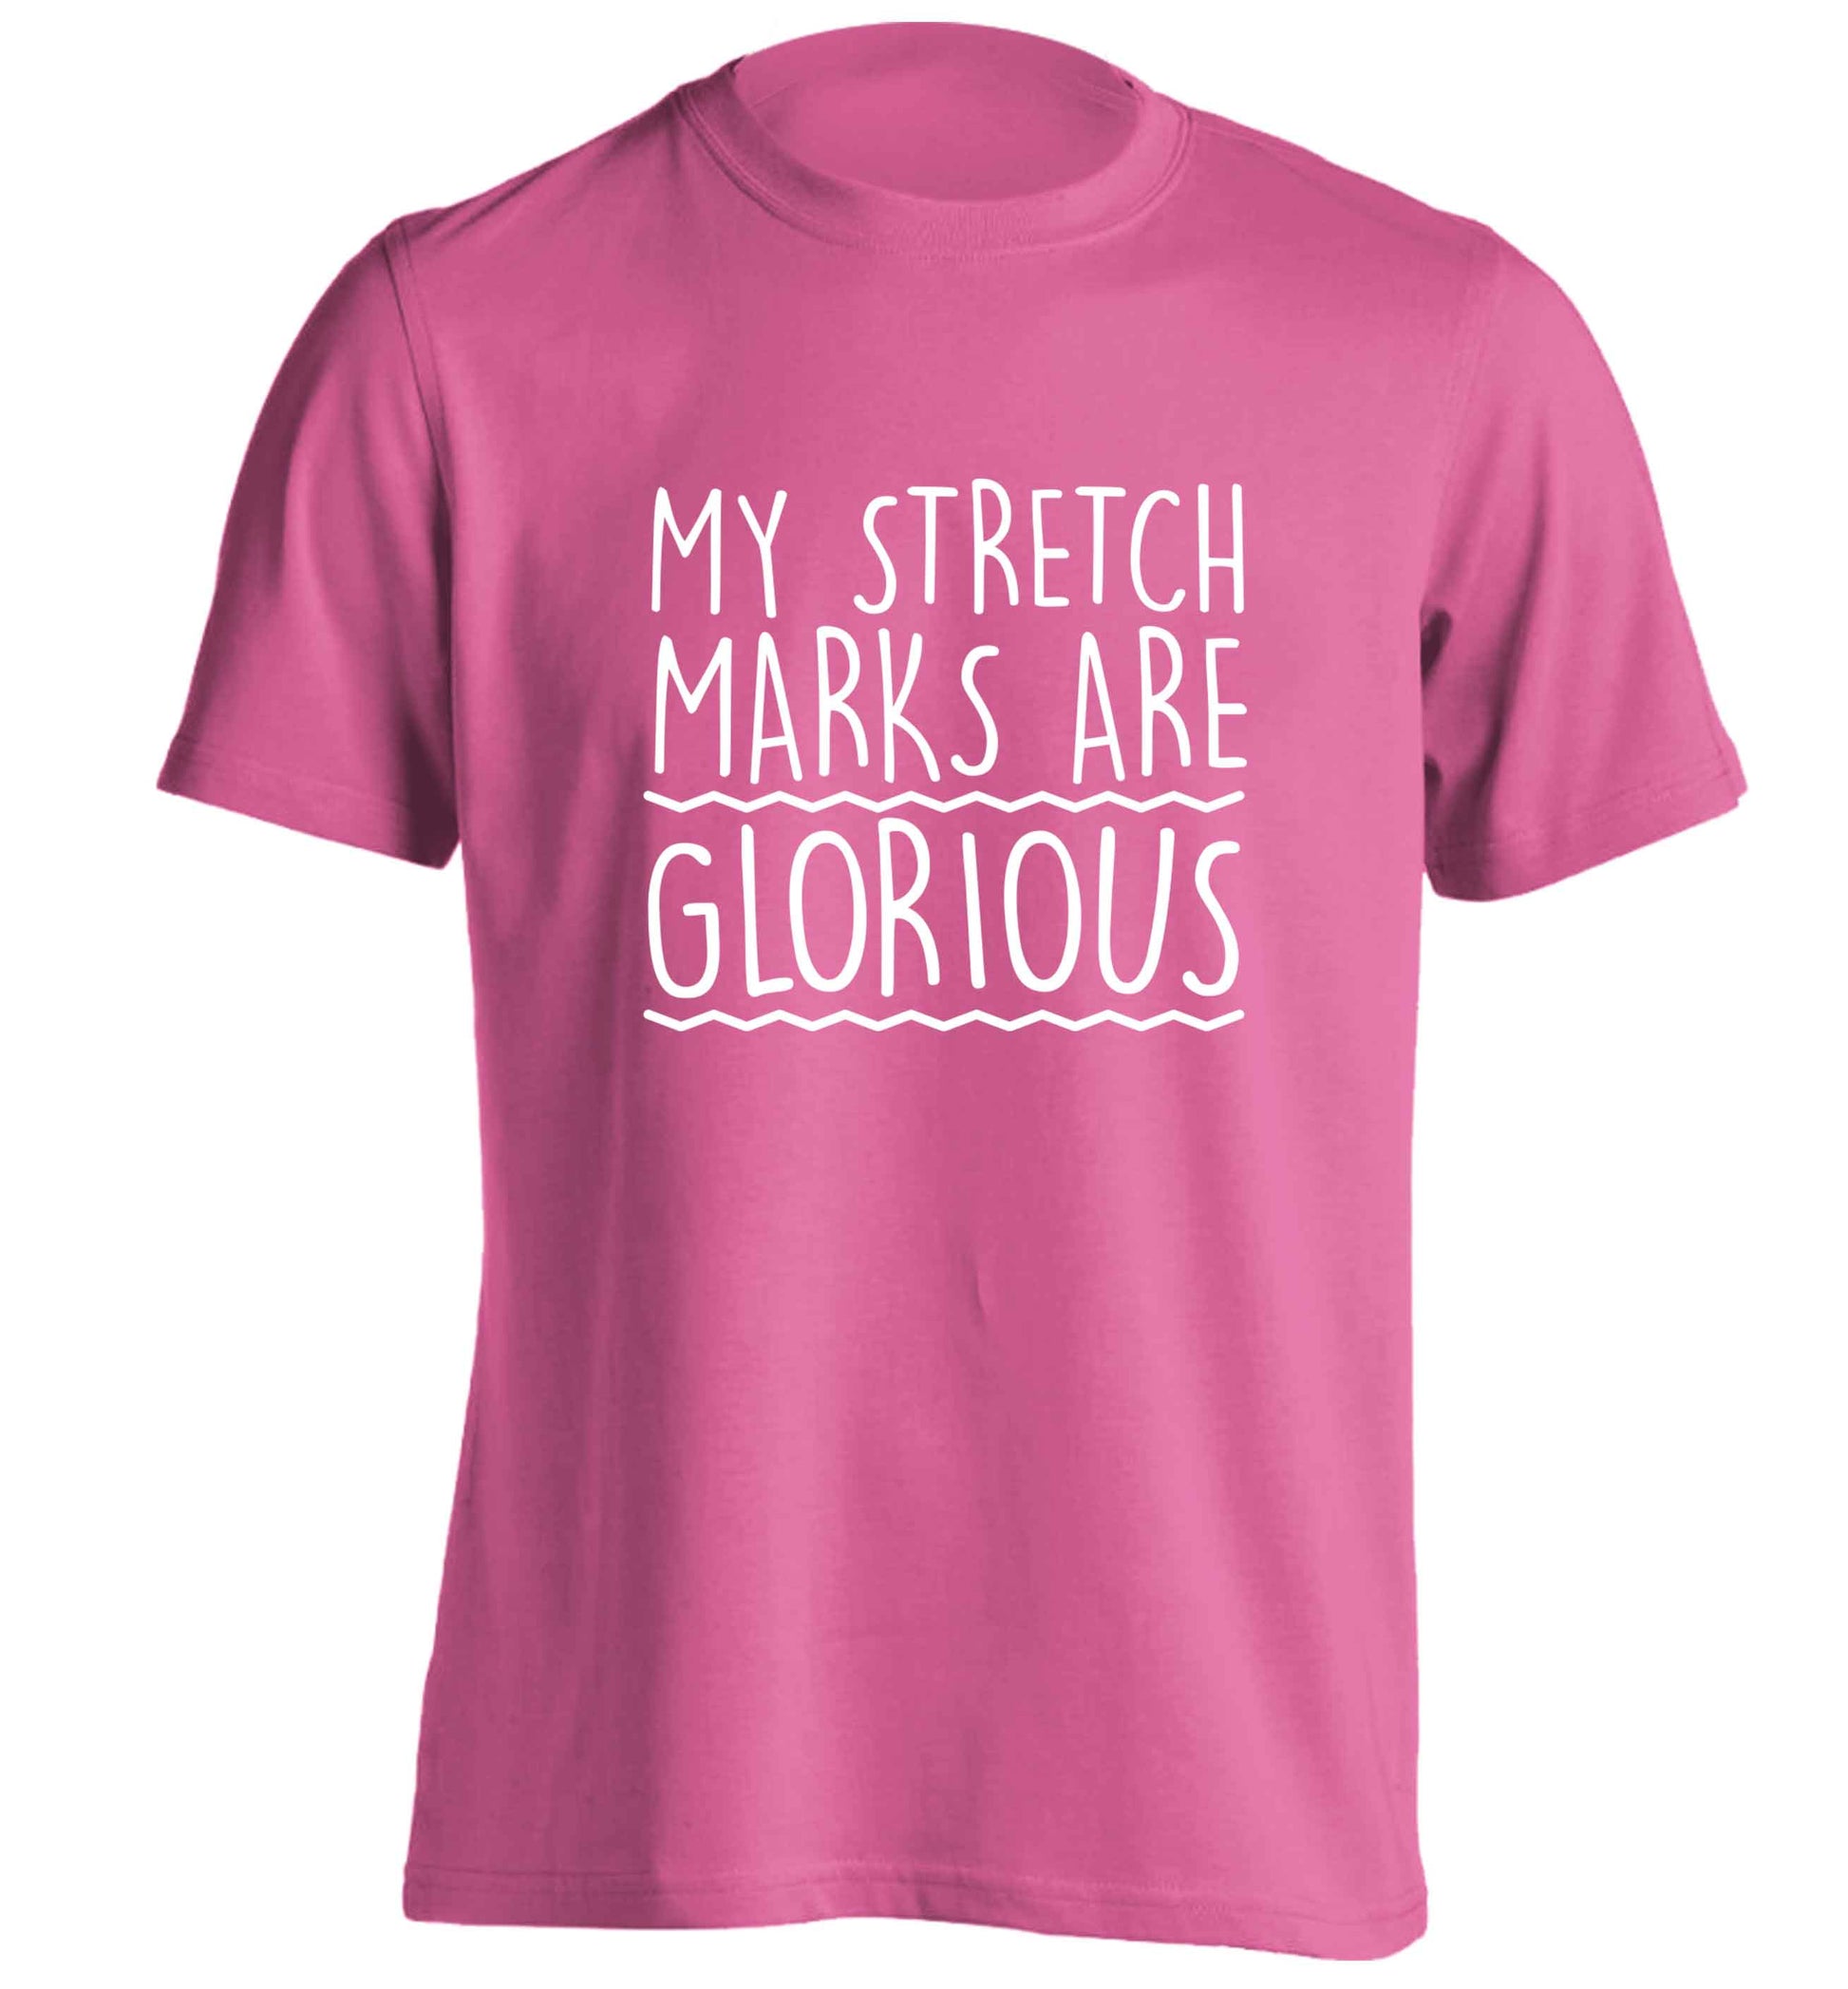 My stretch marks are glorious adults unisex pink Tshirt 2XL